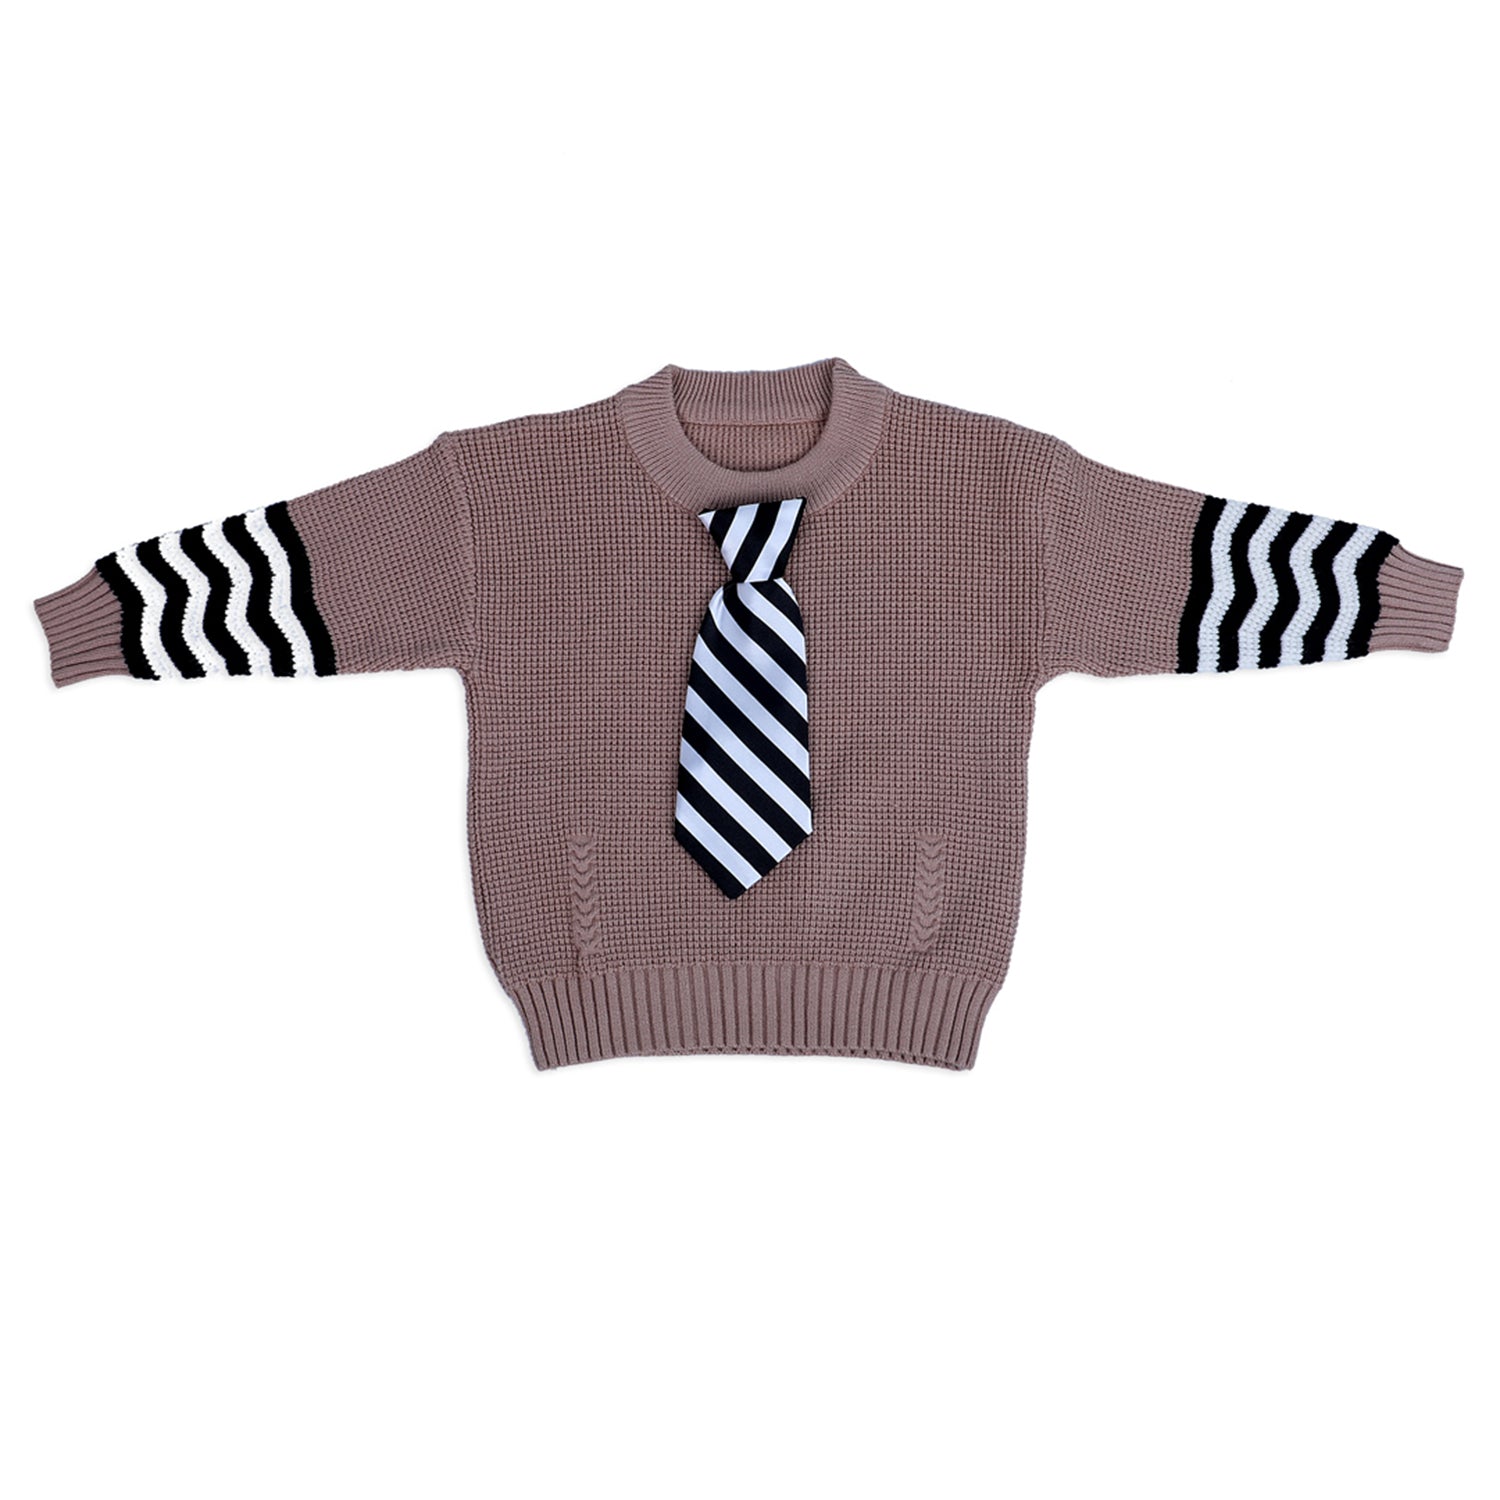 3D Neck Tie Premium Full Sleeves Knitted Sweater - Brown